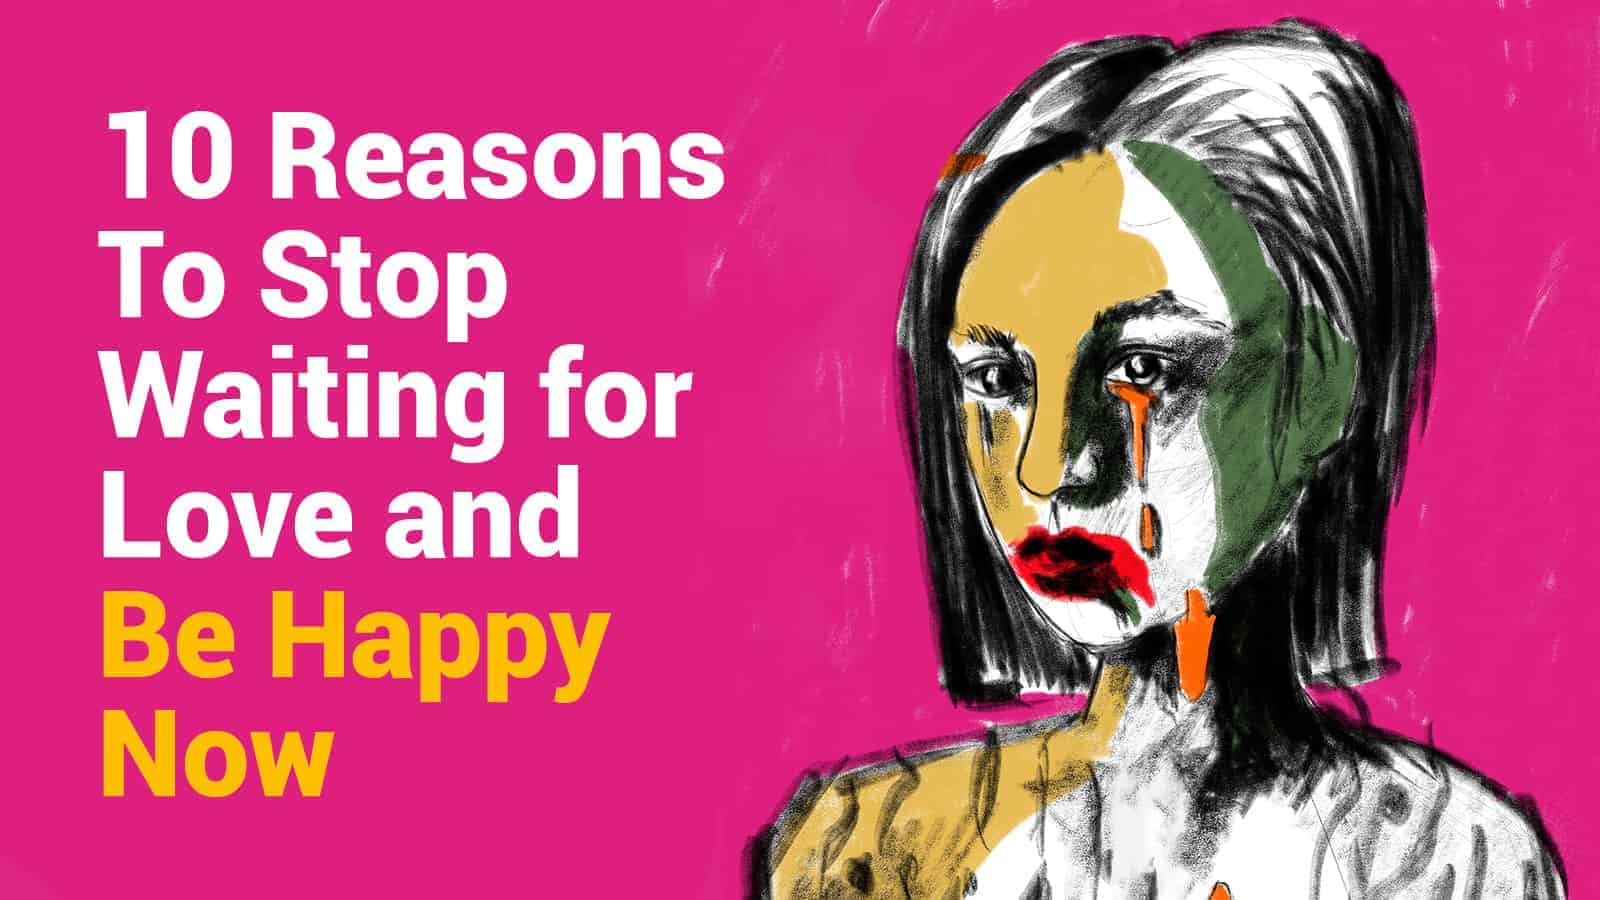 10 Reasons to Stop Waiting for Love and Be Happy Now